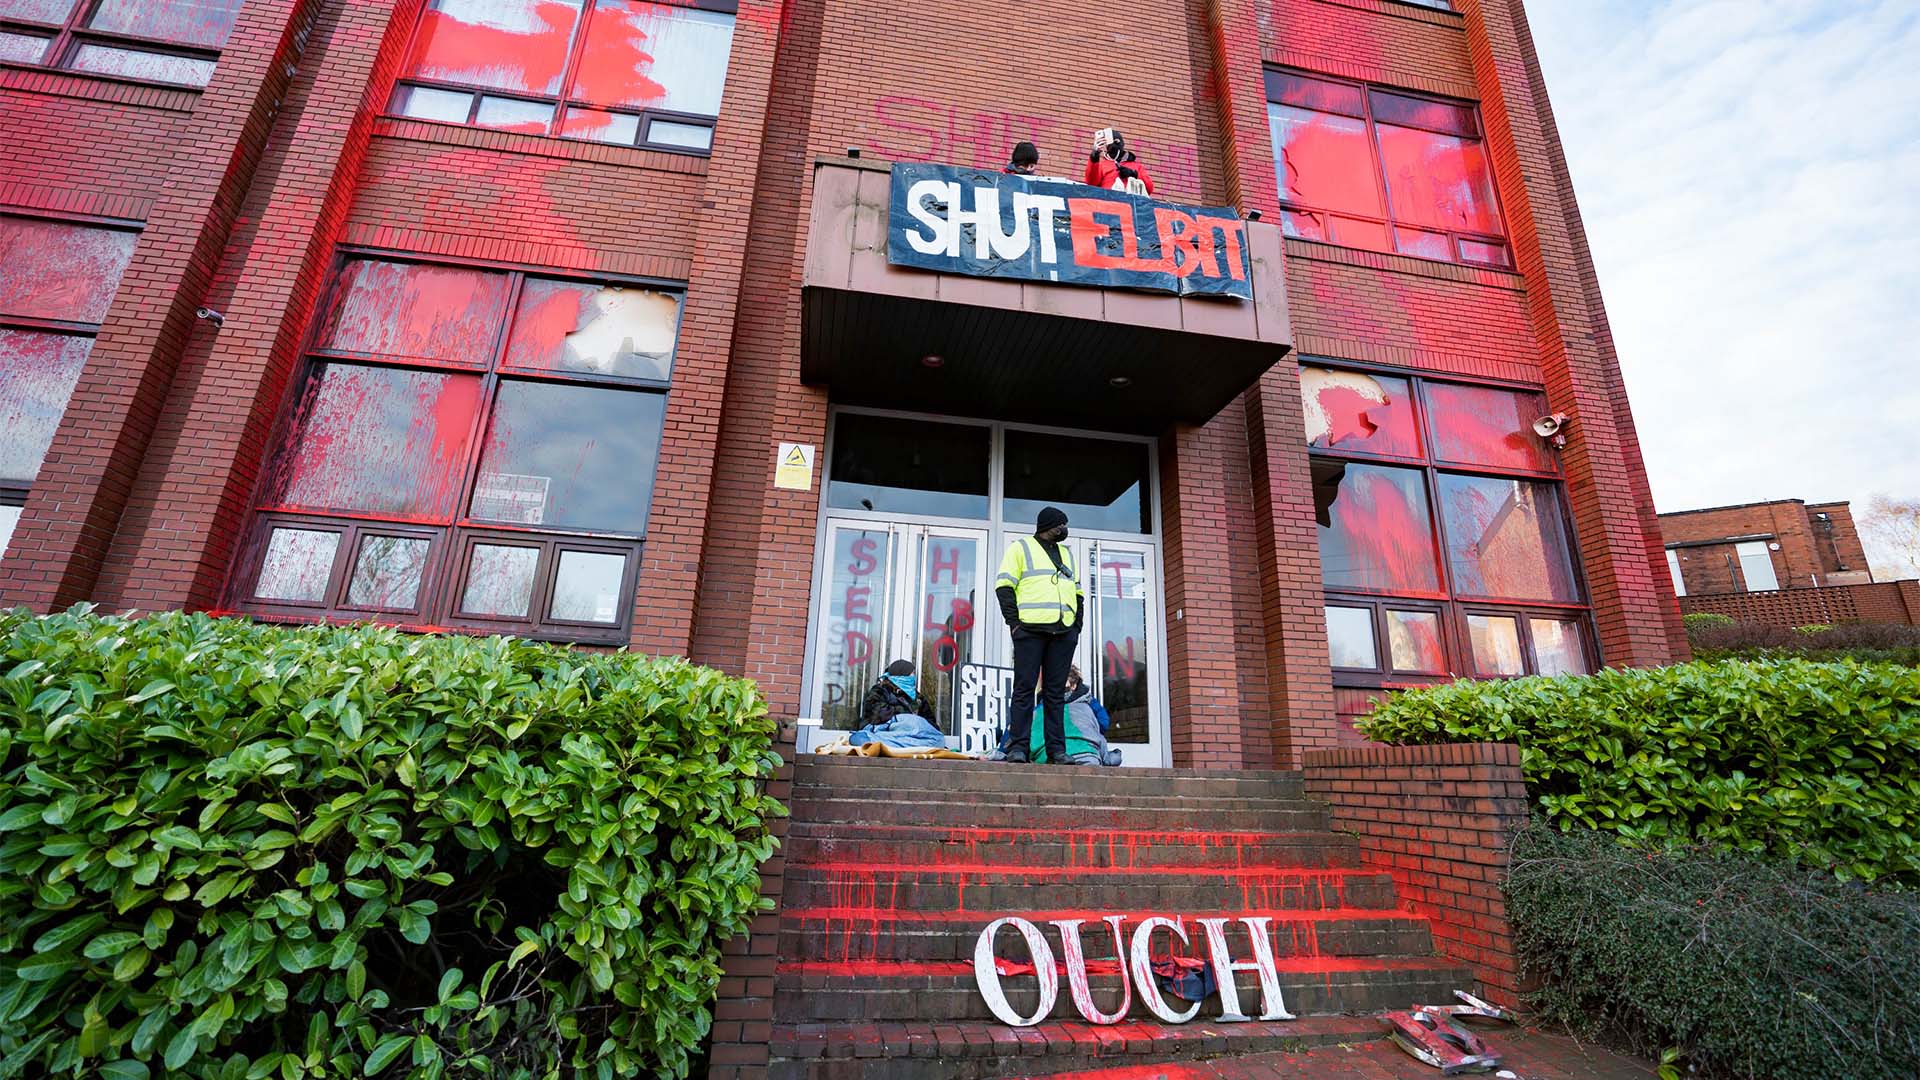 Victory in Oldham: Elbit forced to sell Ferranti after sustained direct action campaign